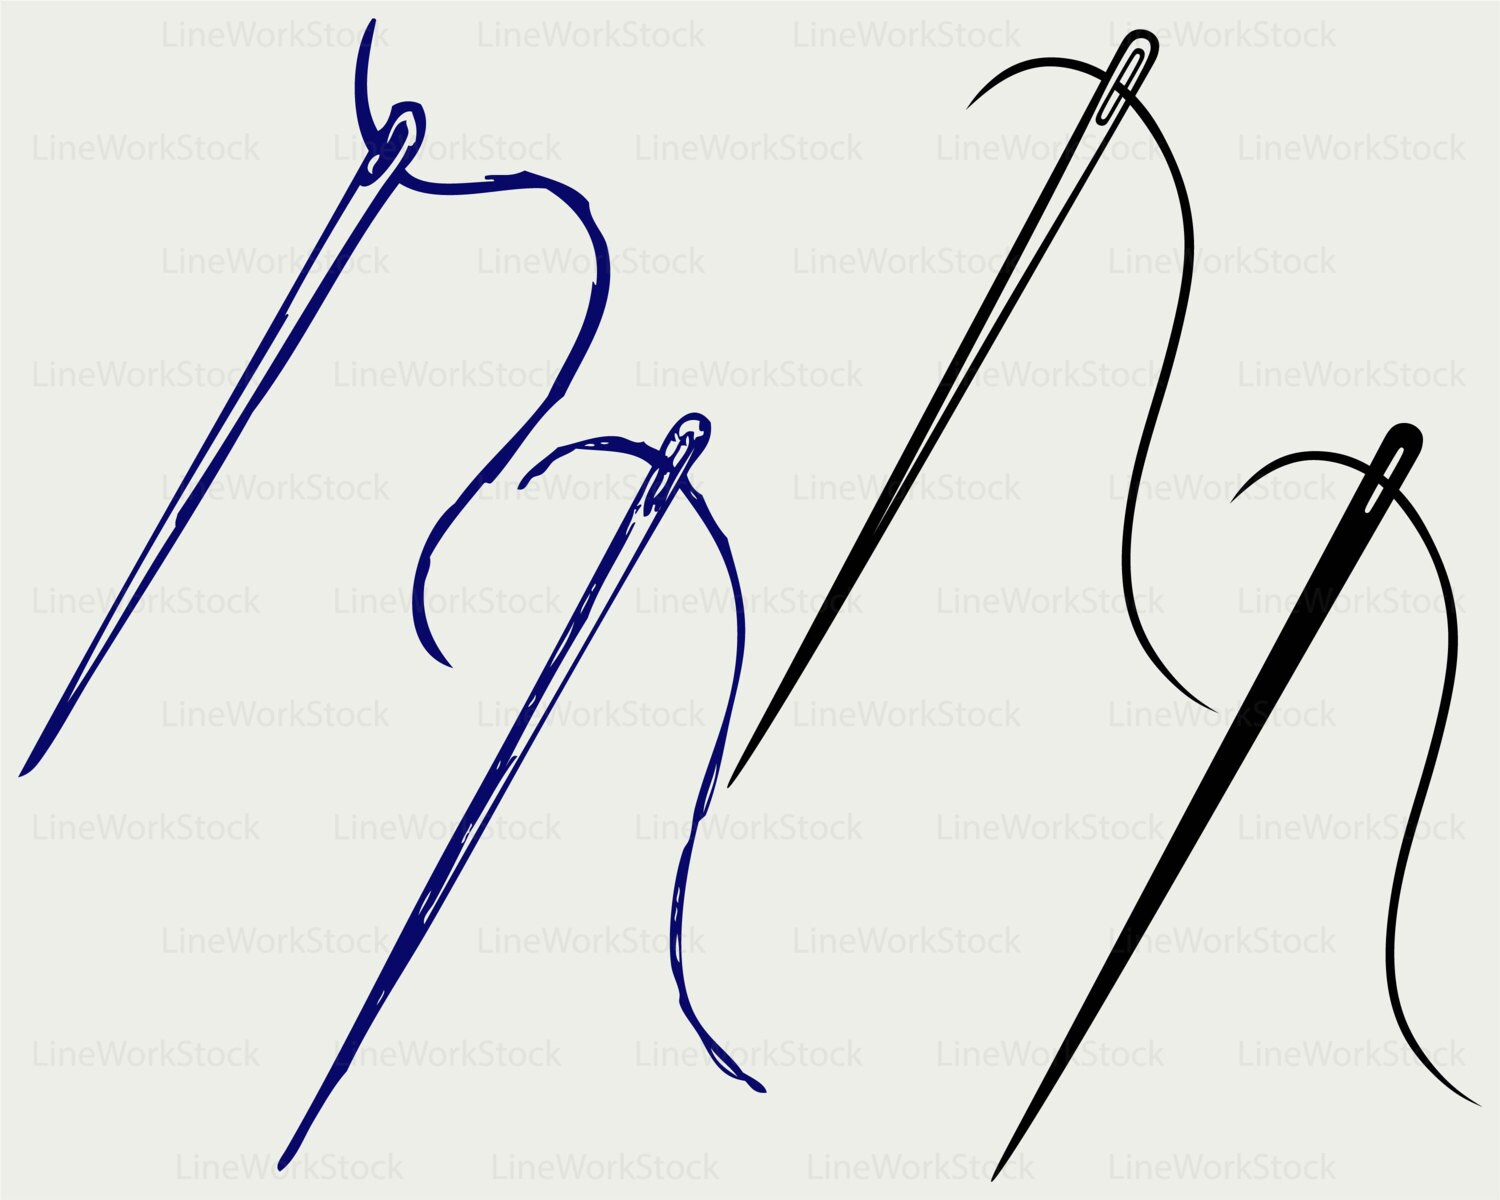 sewing needle vector